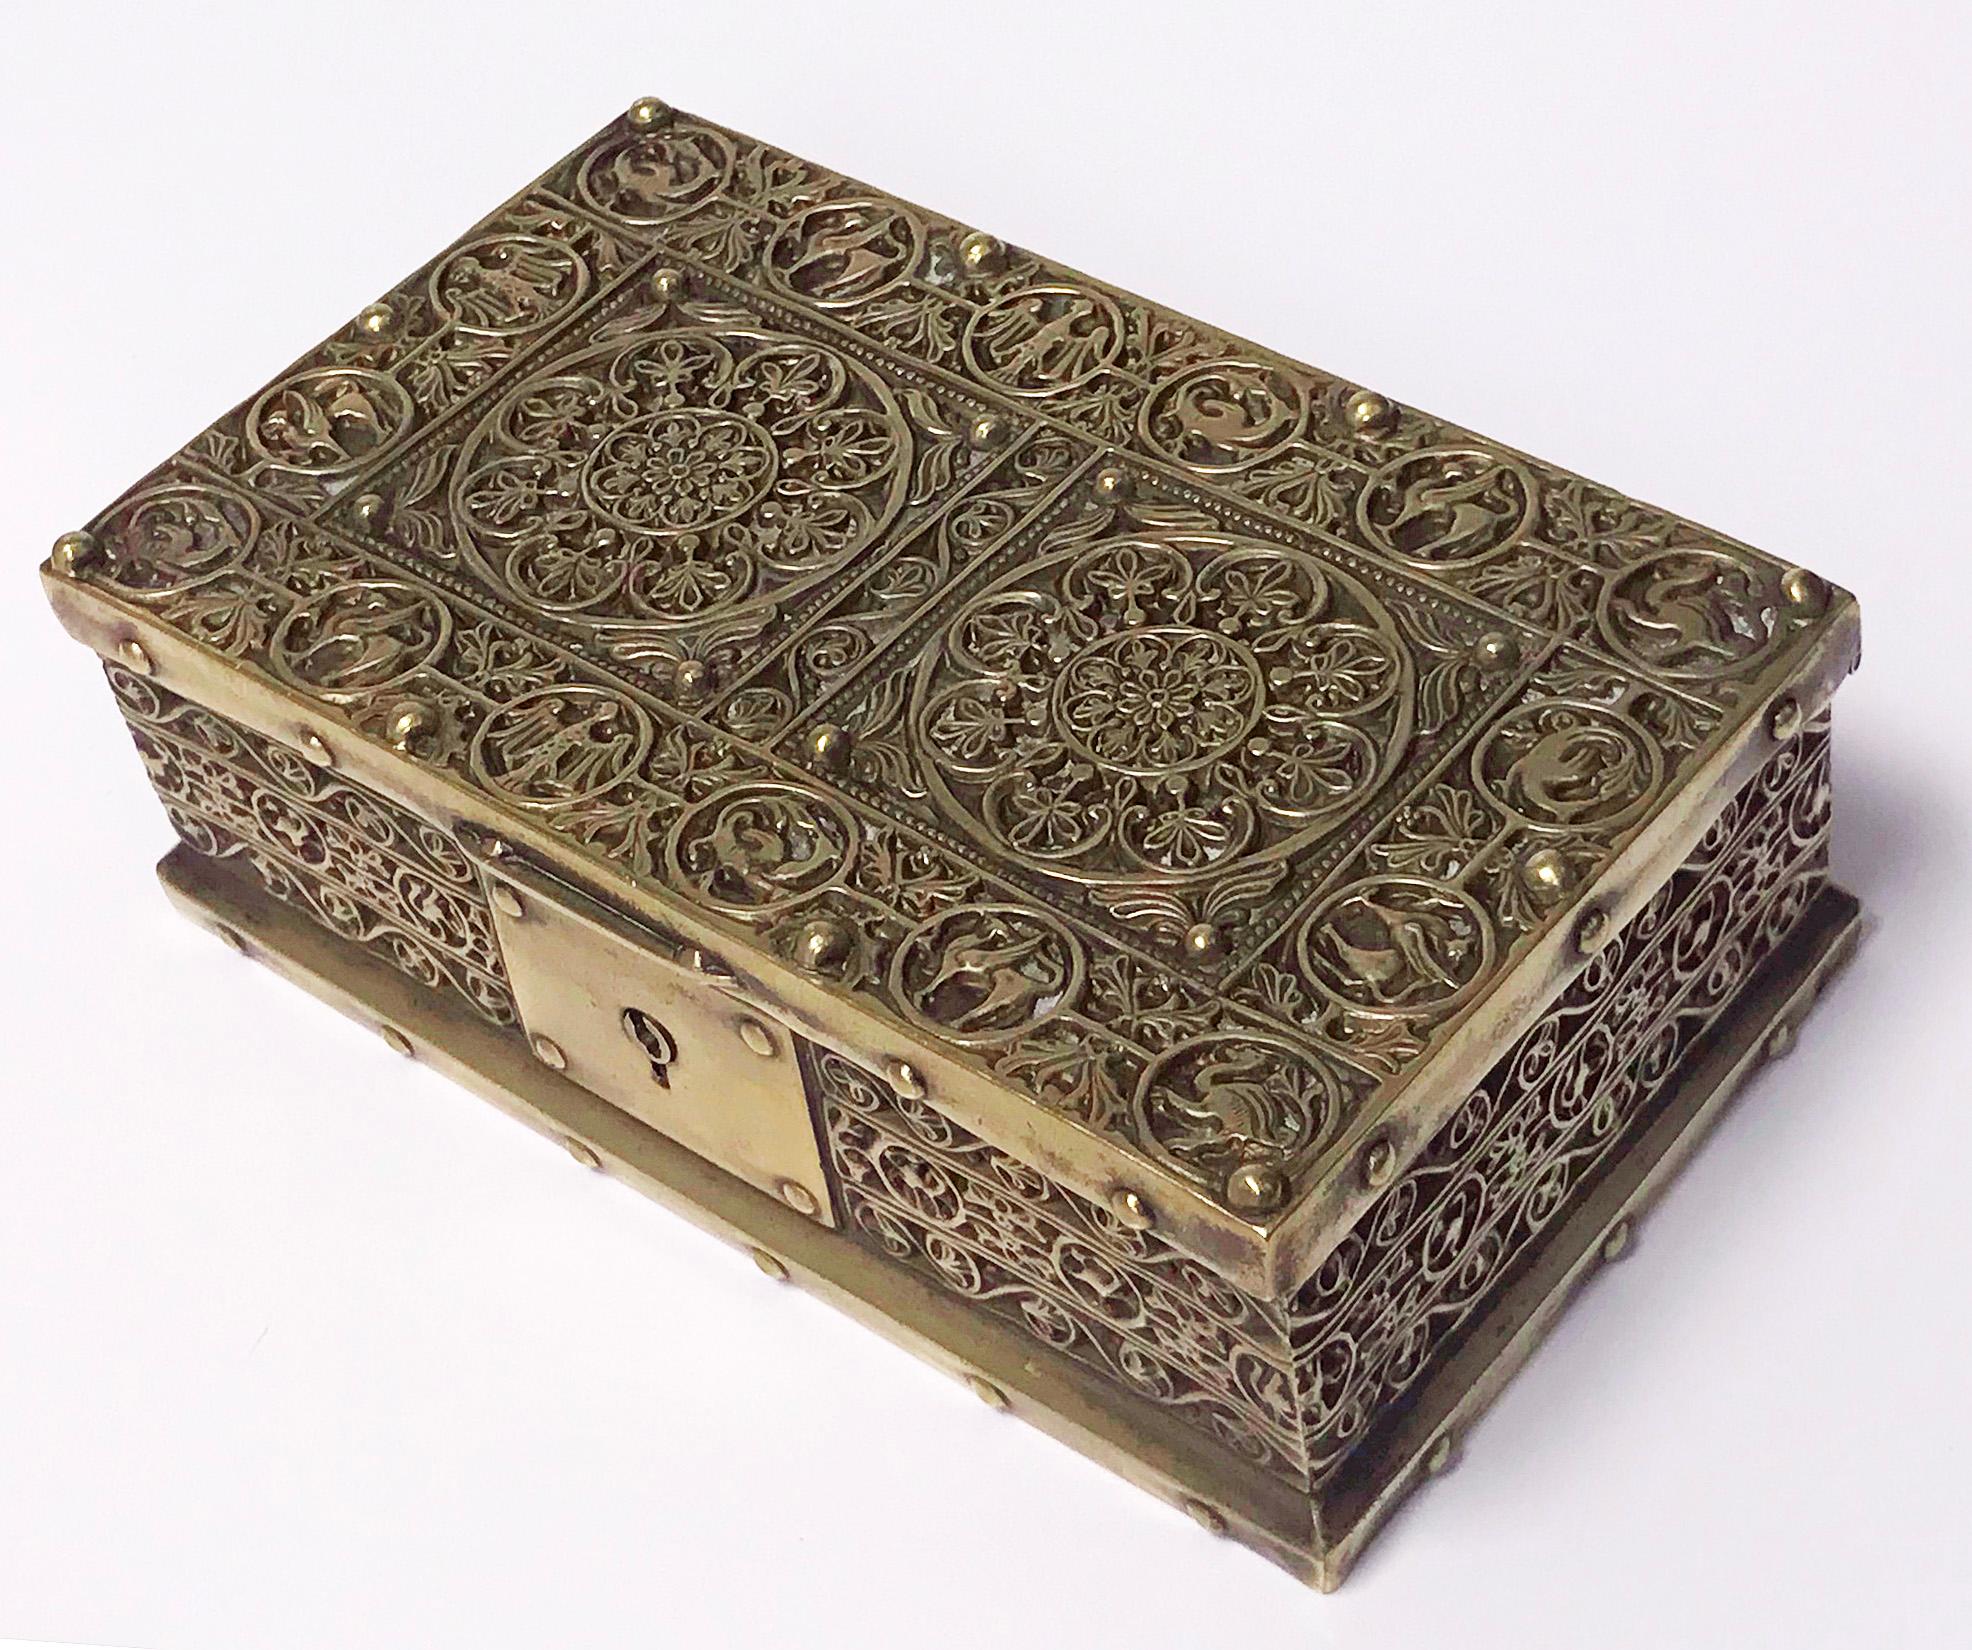 Brass jewelry box, Germany circa 1920 probably Erhard & Söhne of Schwäbisch Gmünd. The box of rectangular shape, the brass body and cover oxidized inlay classic art nouveau arabesque decoration featuring panels with images of mythological creatures